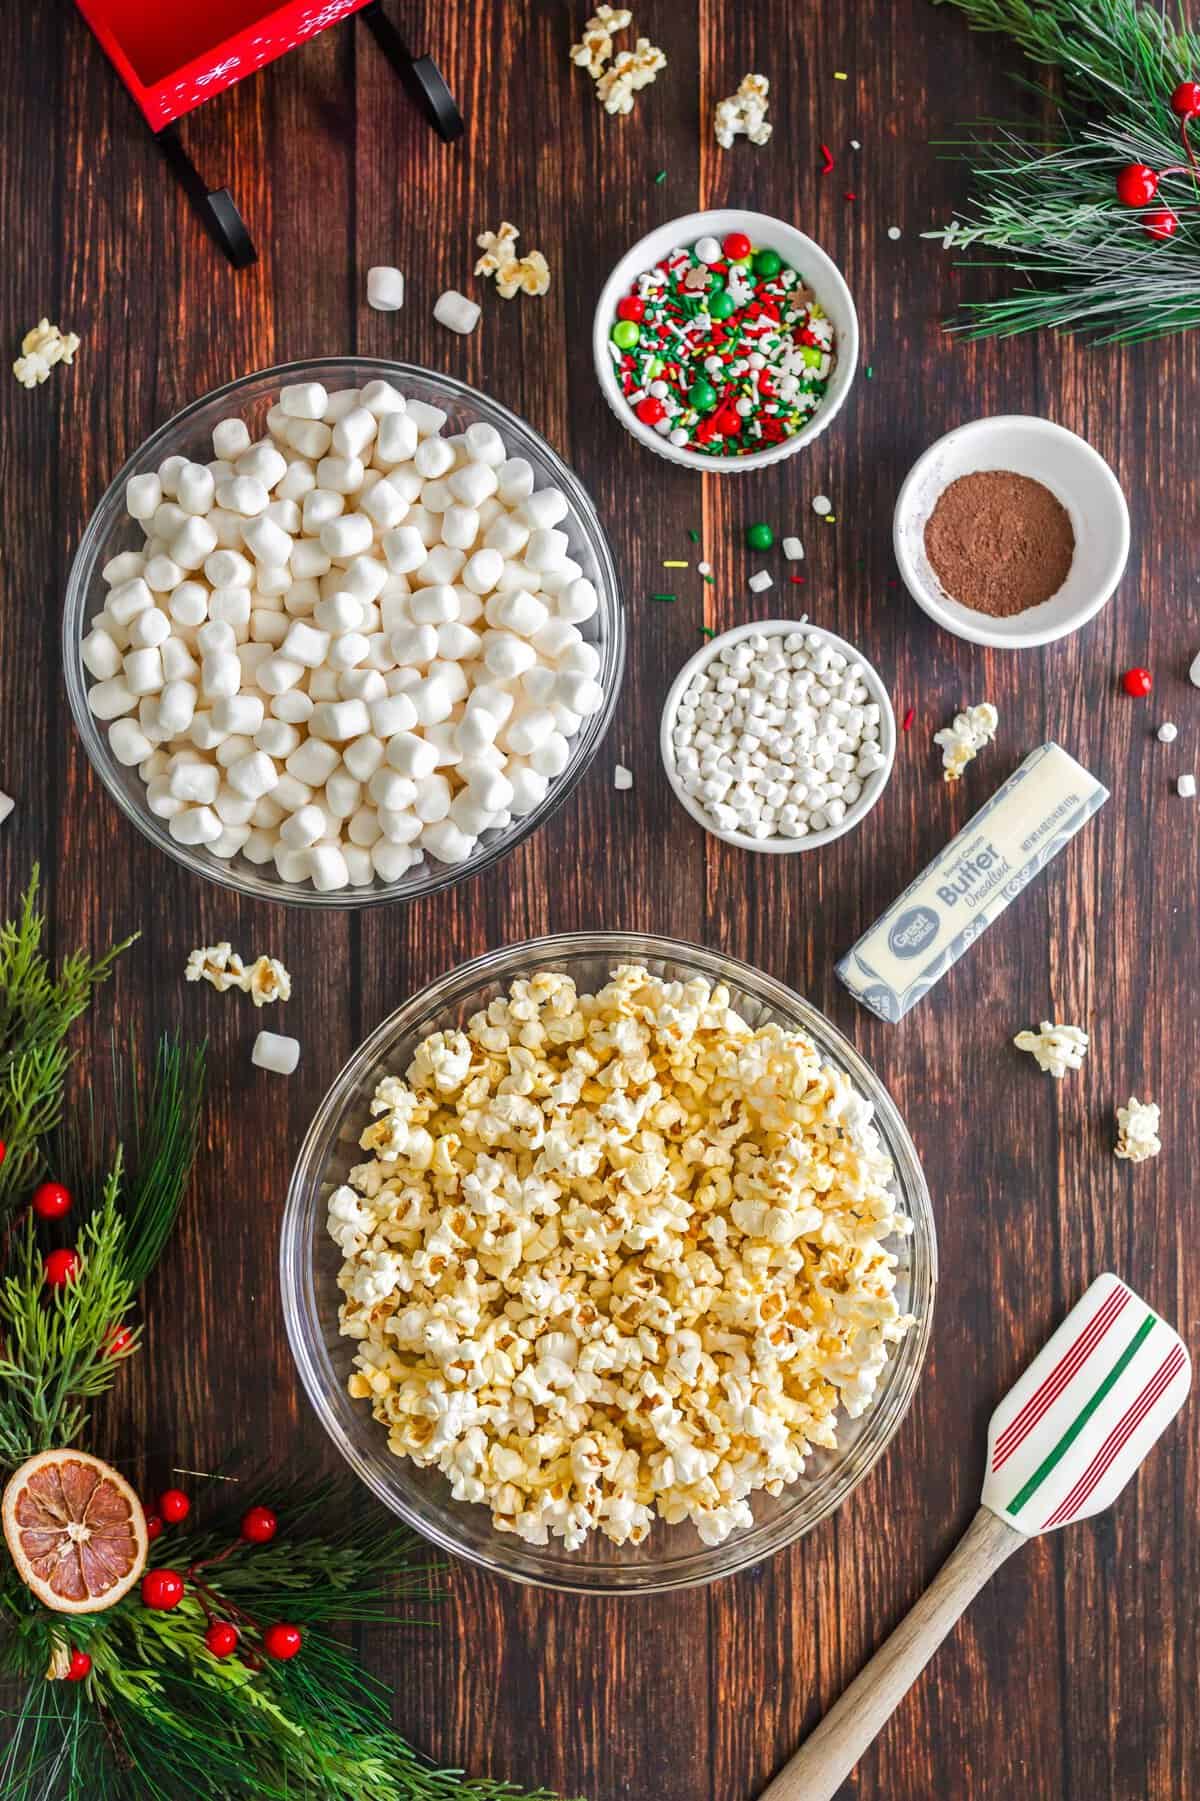 Ingredients to make the hot chocolate popcorn balls on a wood background. 